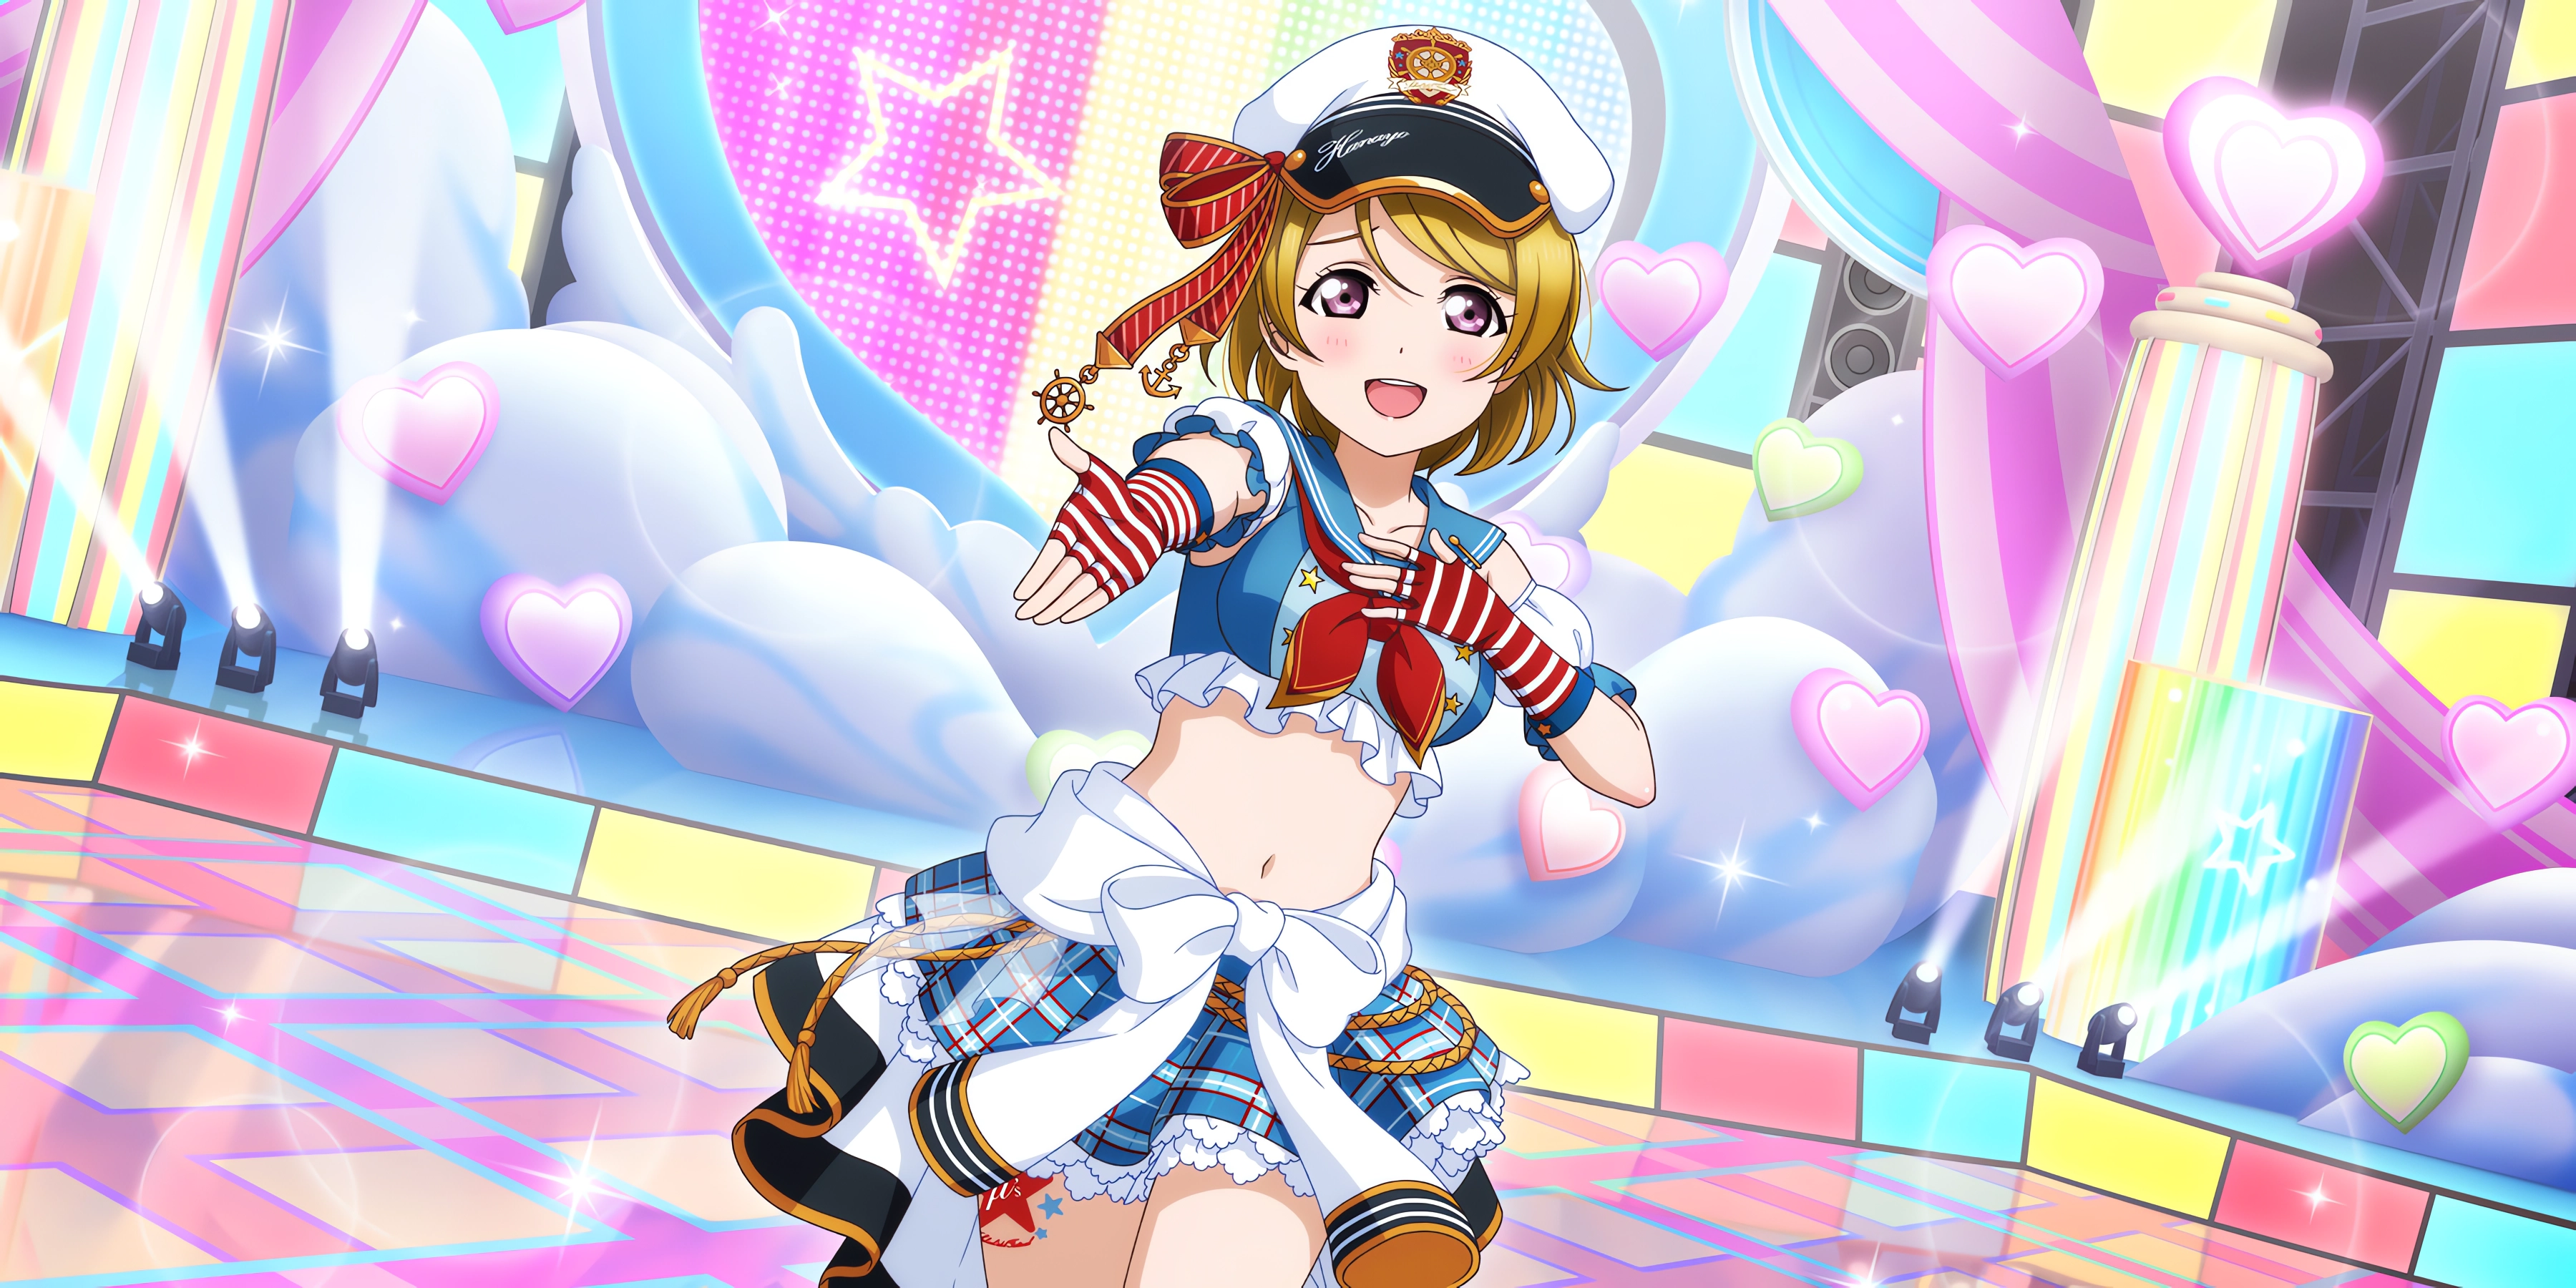 Koizumi Hanayo Love Live Looking At Viewer Anime Anime Girls Stages Stage Light Stars Hat Arms Reach 3600x1800